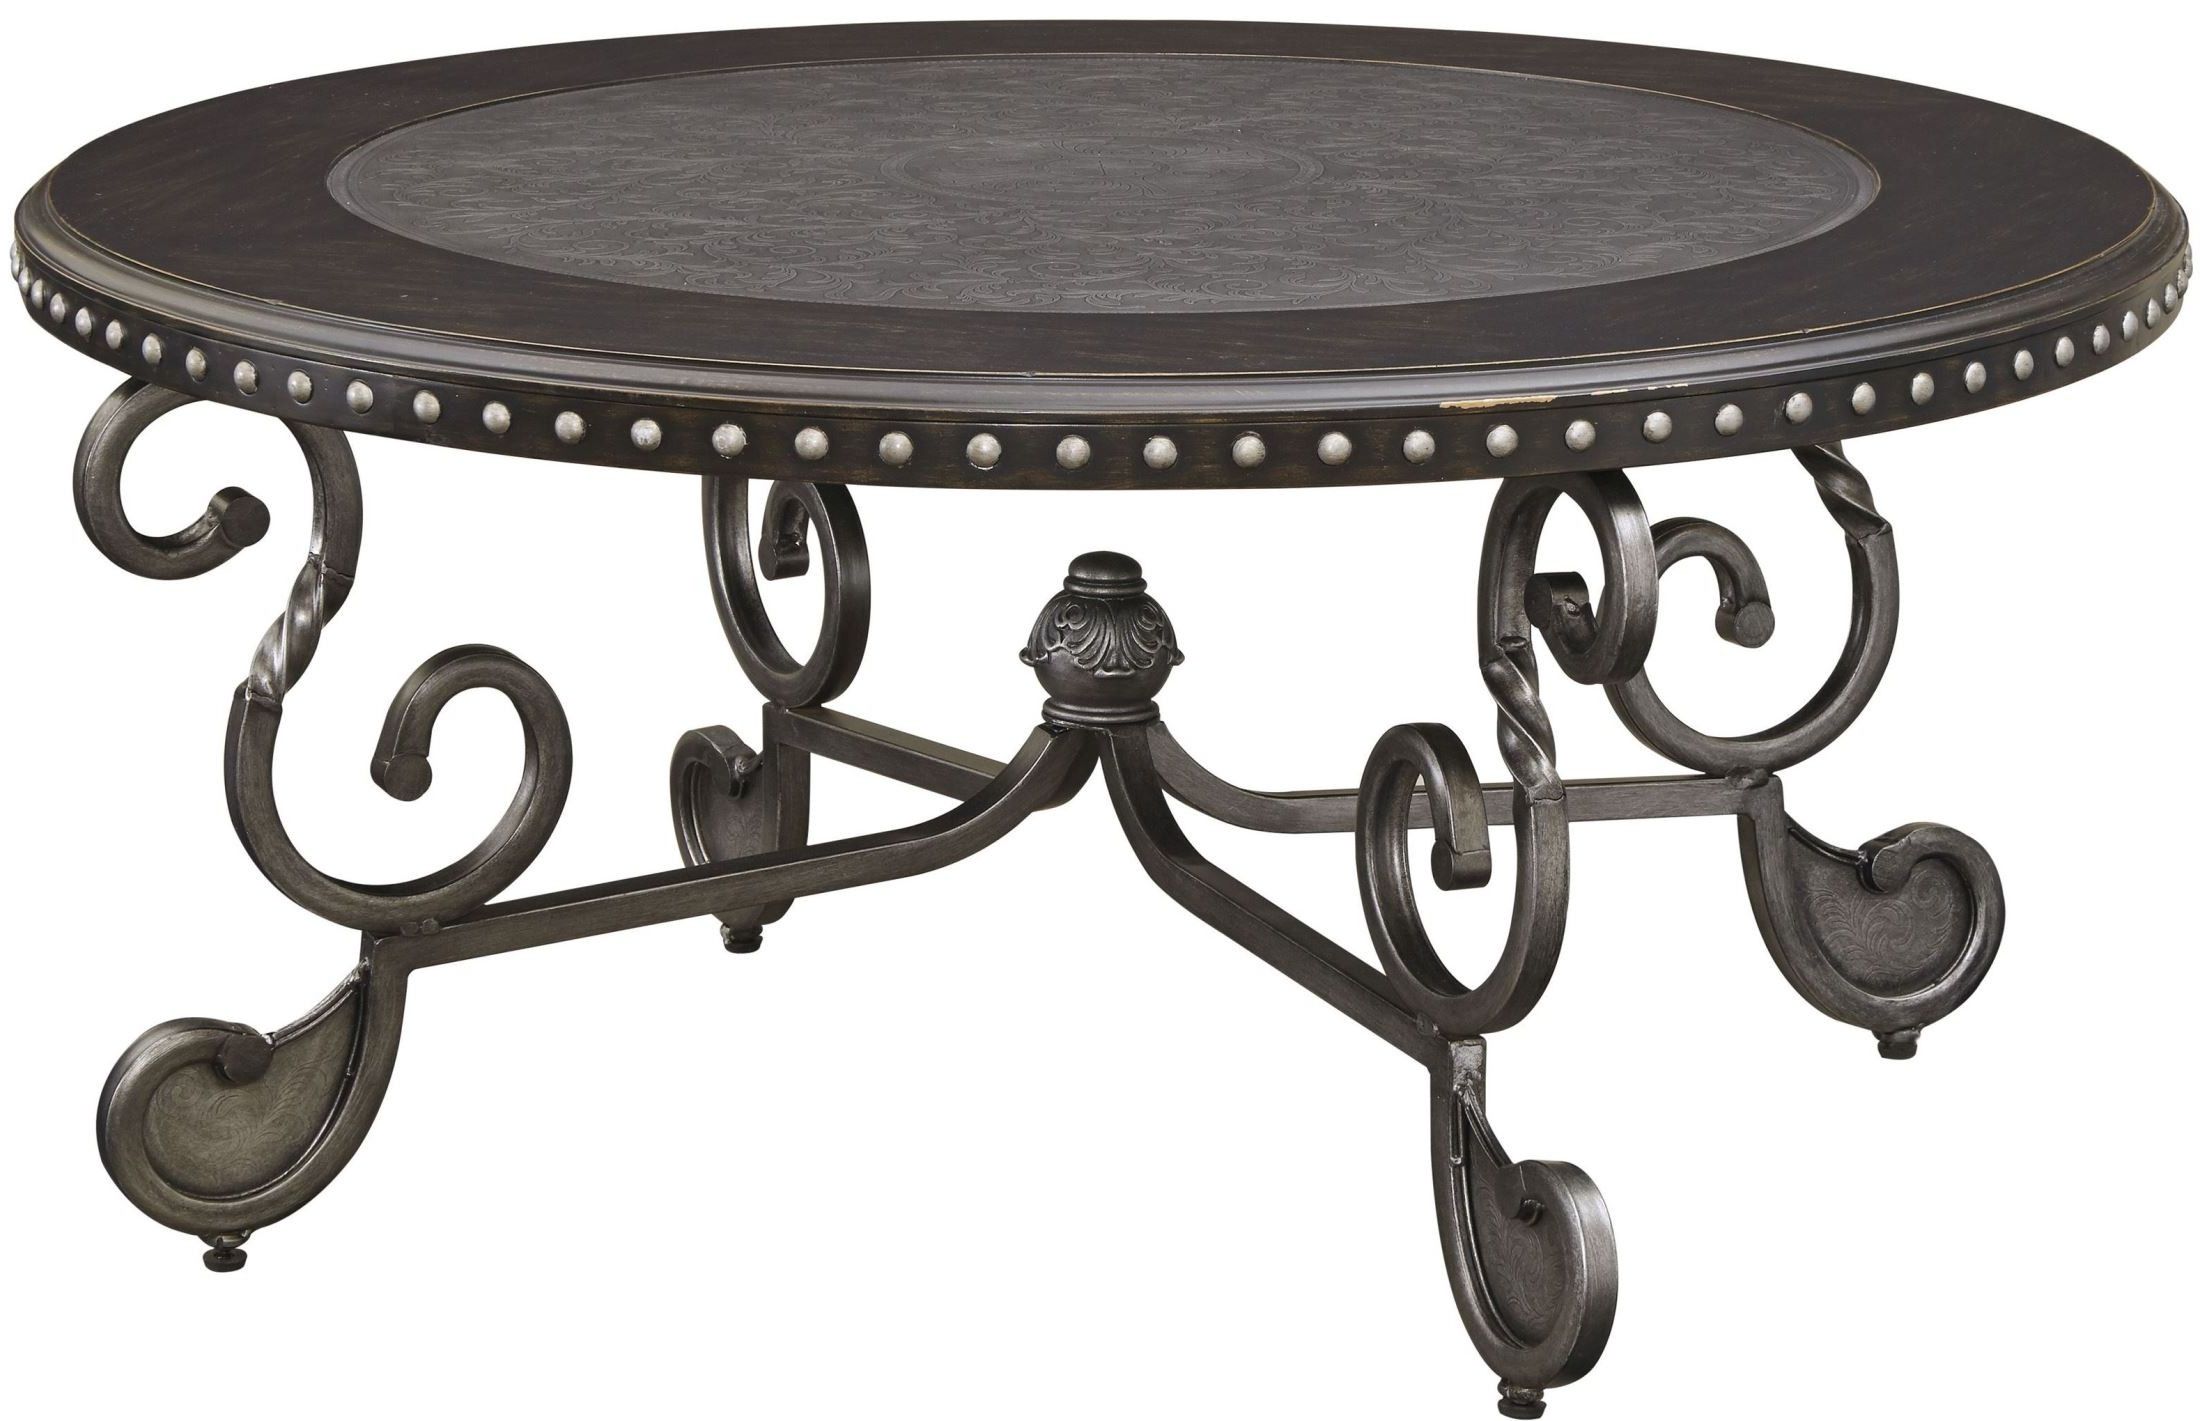 Jonidell Black Round Cocktail Table From Ashley (t582 8 Pertaining To Newest Dark Coffee Bean Cocktail Tables (Gallery 11 of 20)